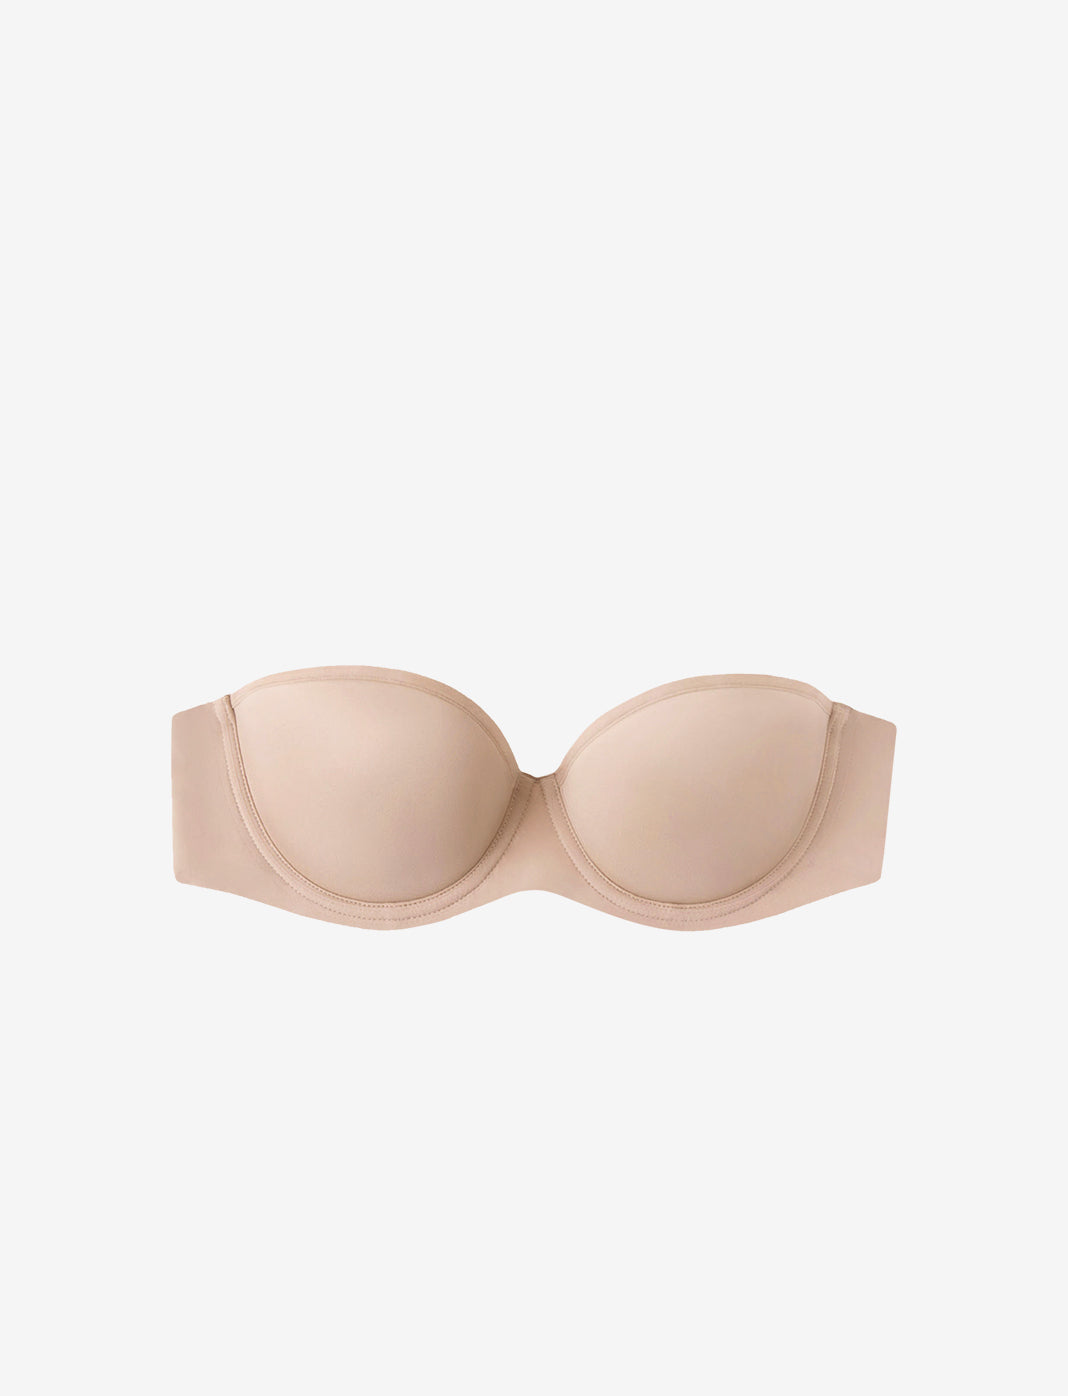 24/7® Classic Strapless Bra Taupe - Best & Most Comfortable No